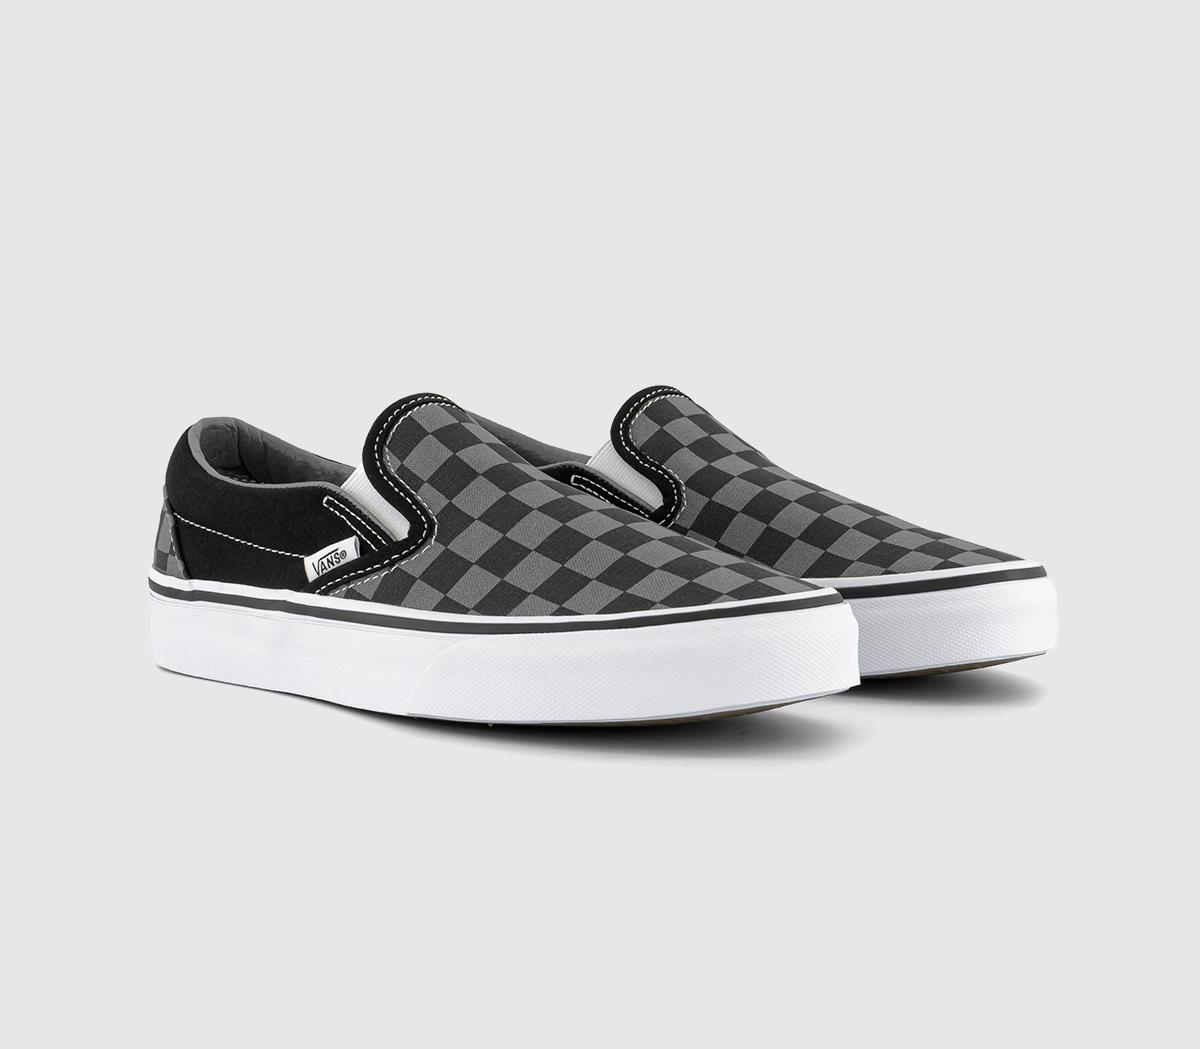 Vans Classic Slip On Trainers Black Pewter Check, 9.5